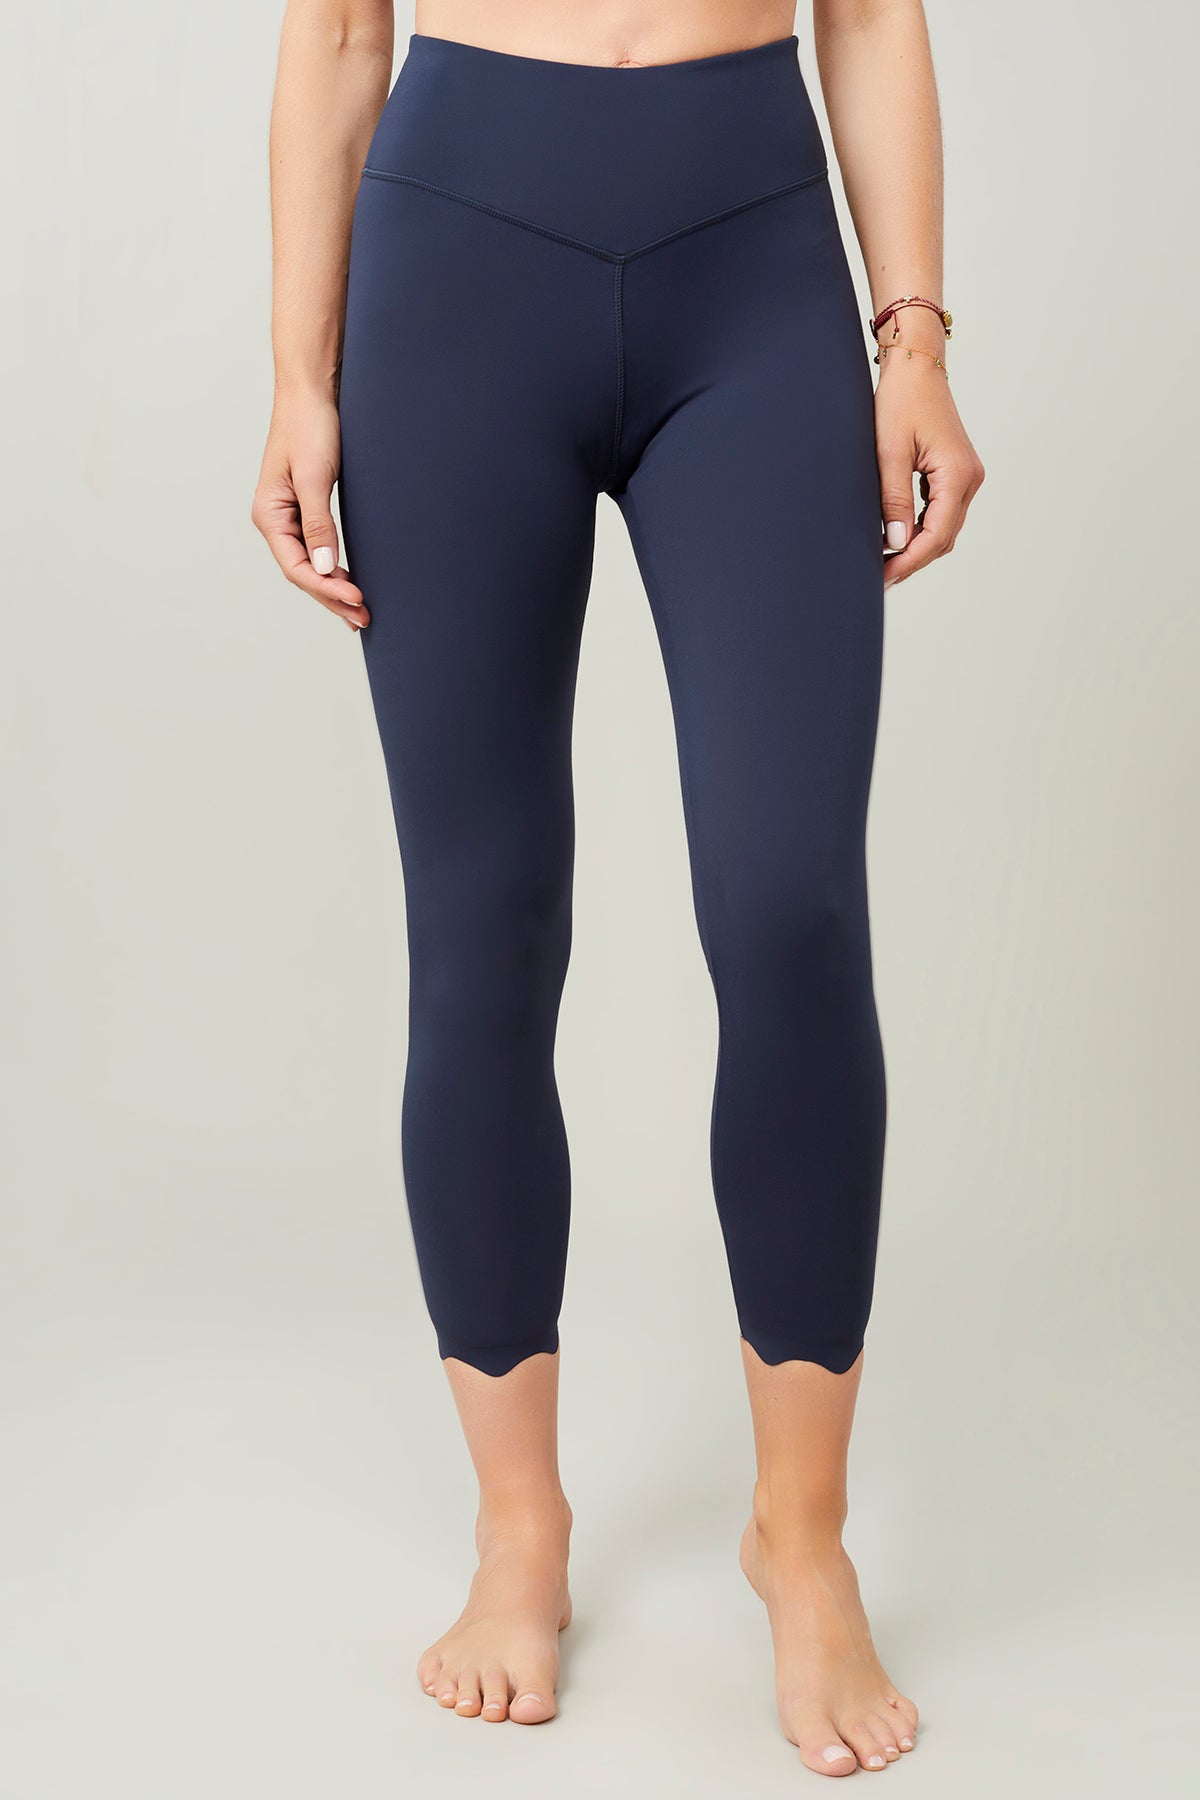 Yoga Wear out of recycled polyester